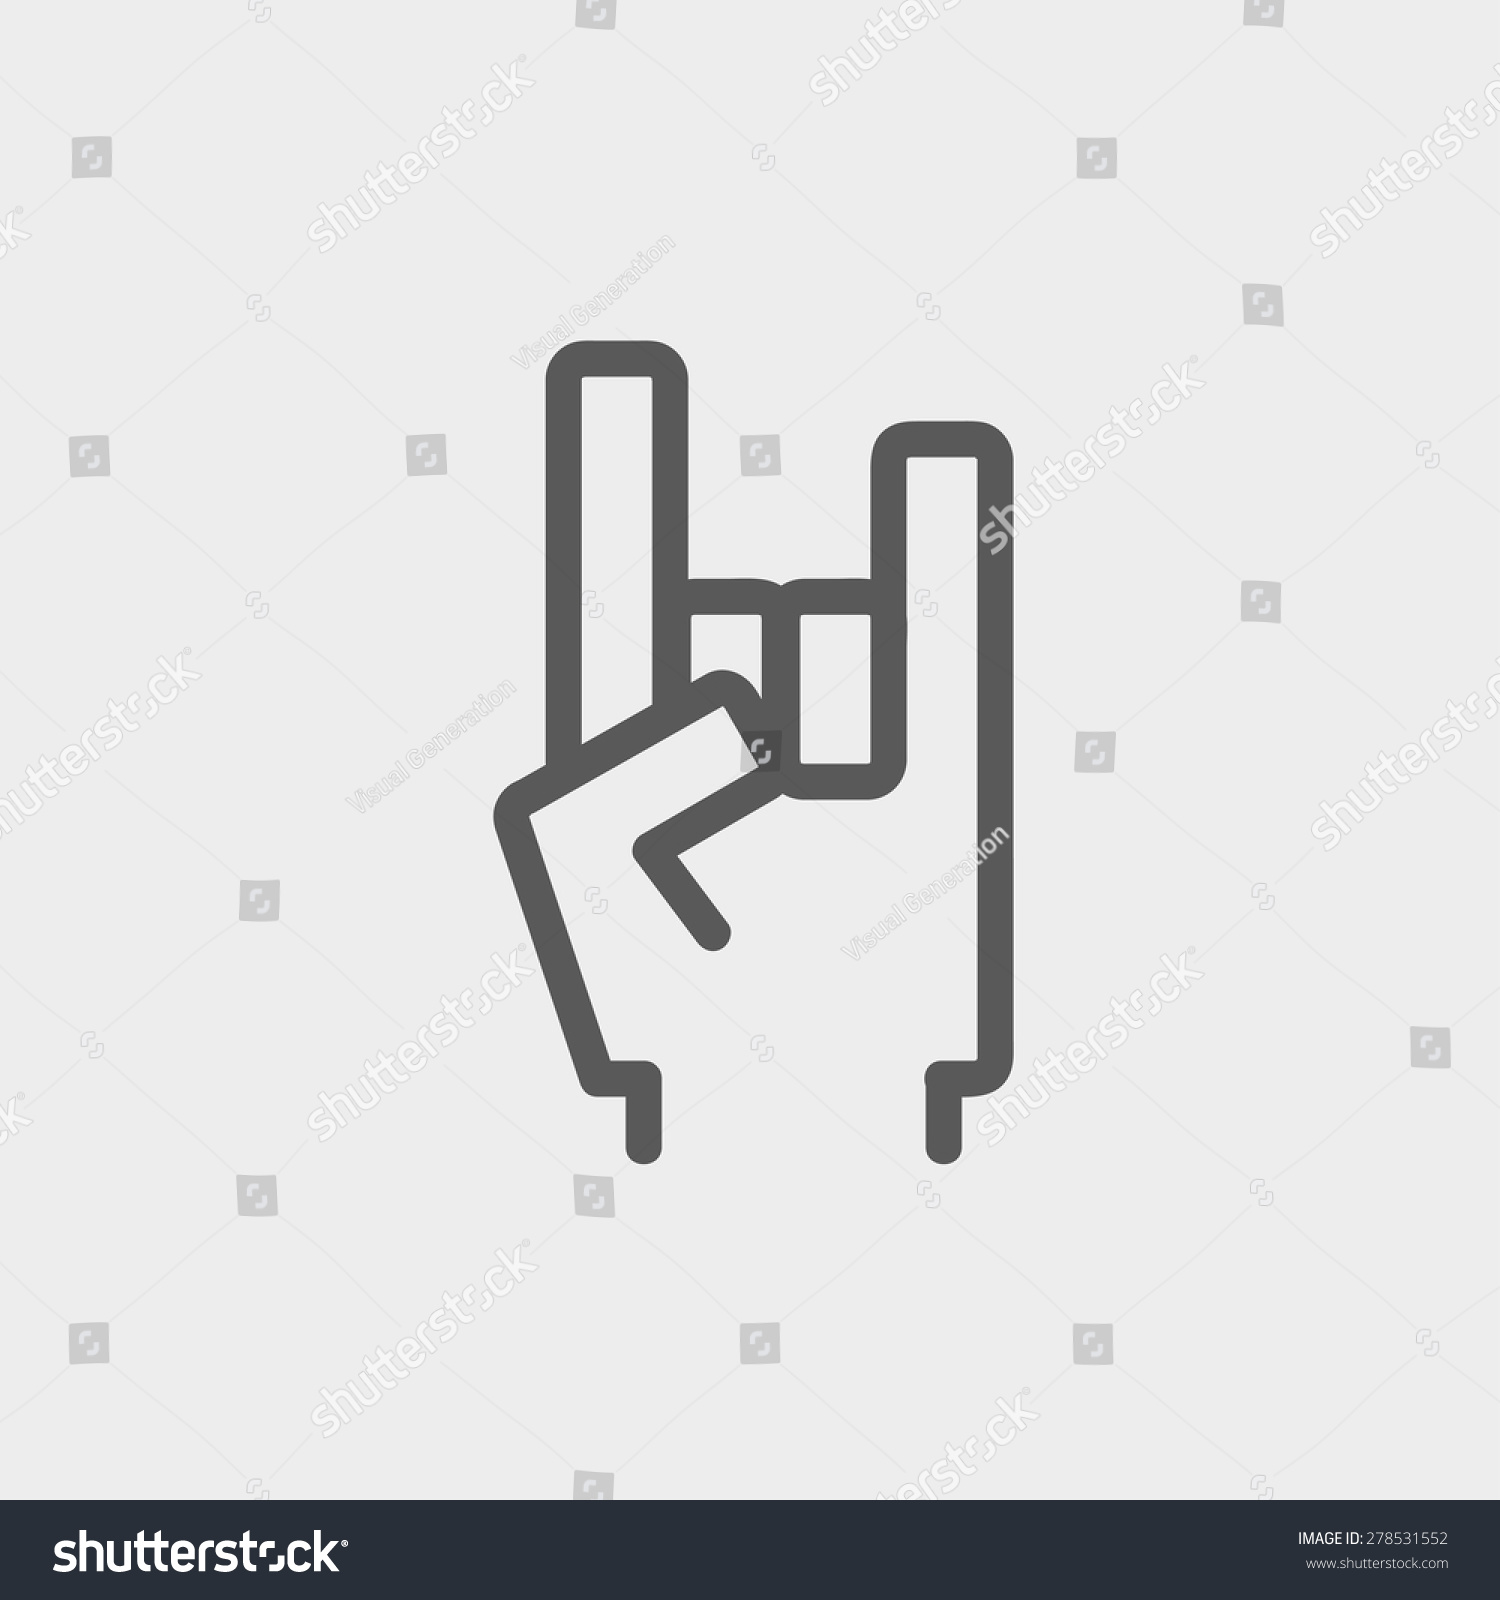 Hand with white outline forming a rock on symbol - Free gestures icons